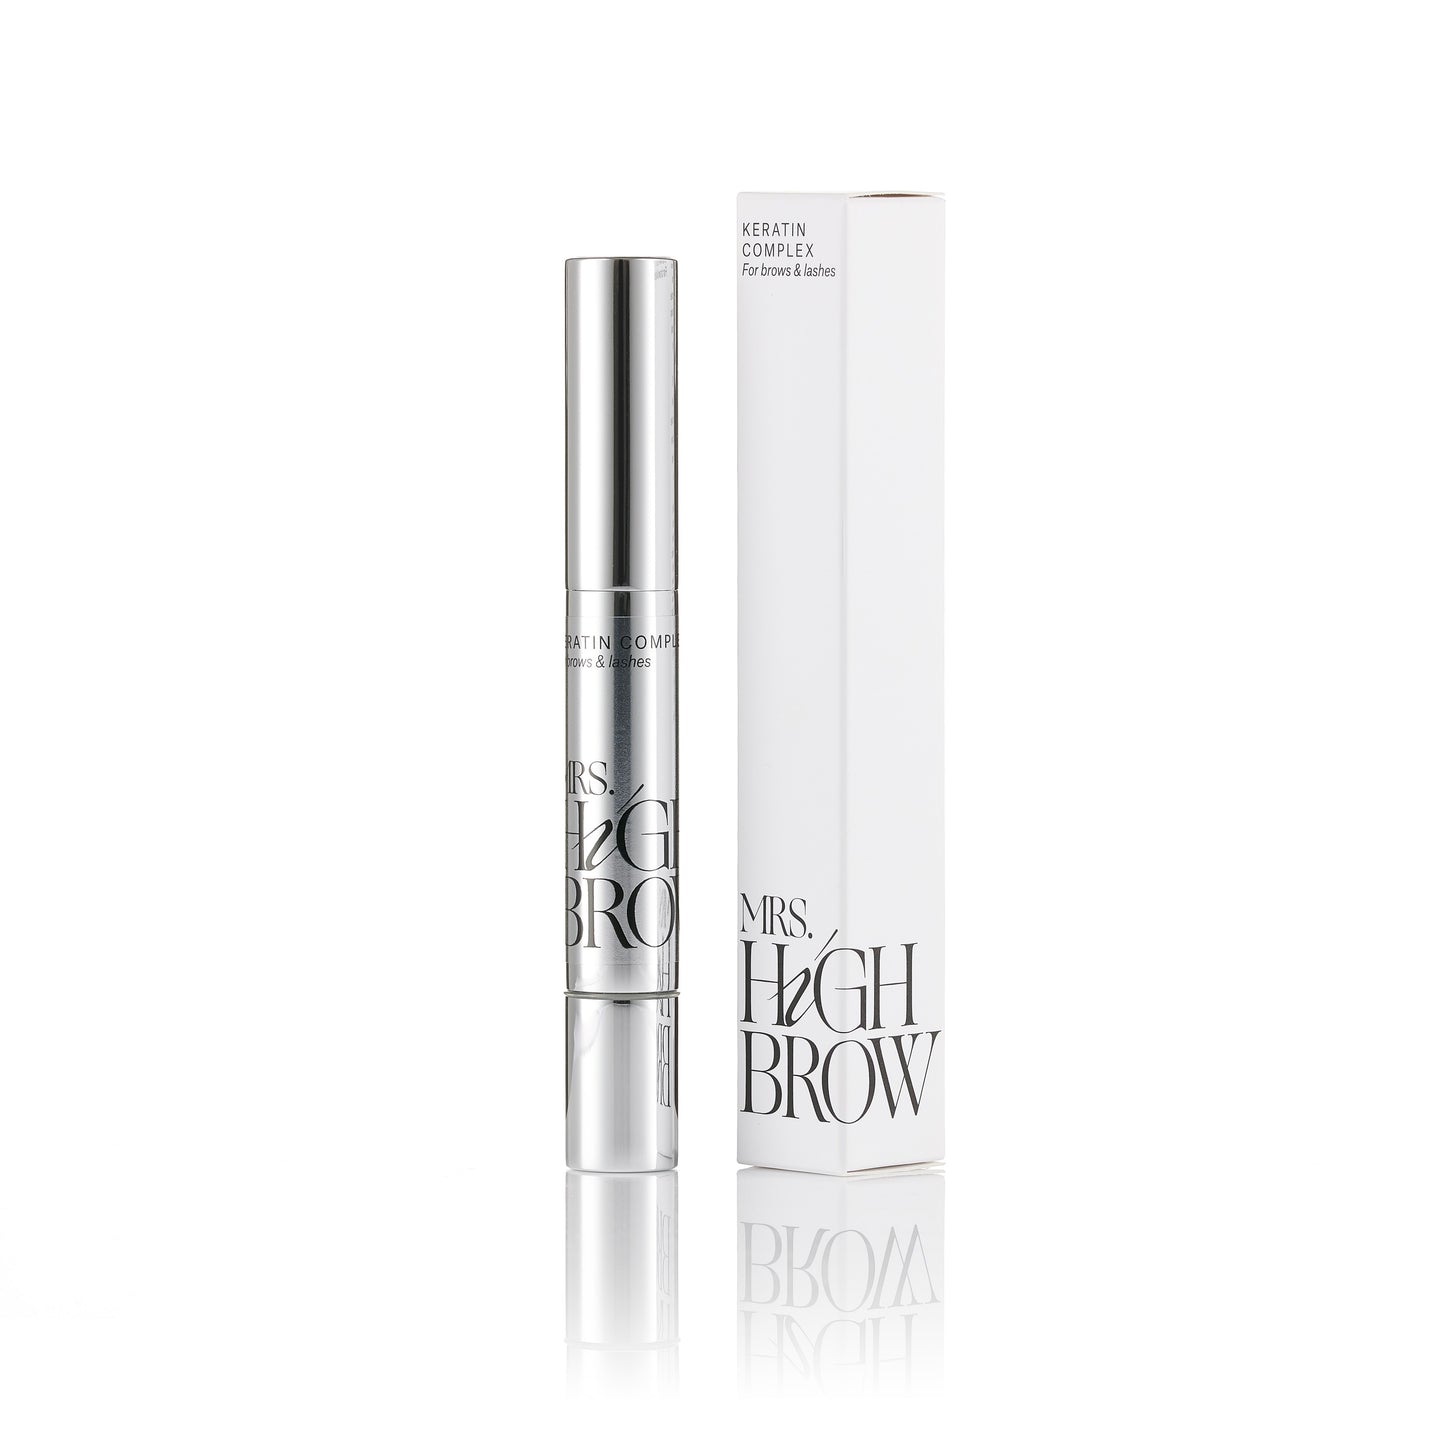 Mrs.Highbrow Keratin Complex lashes brows